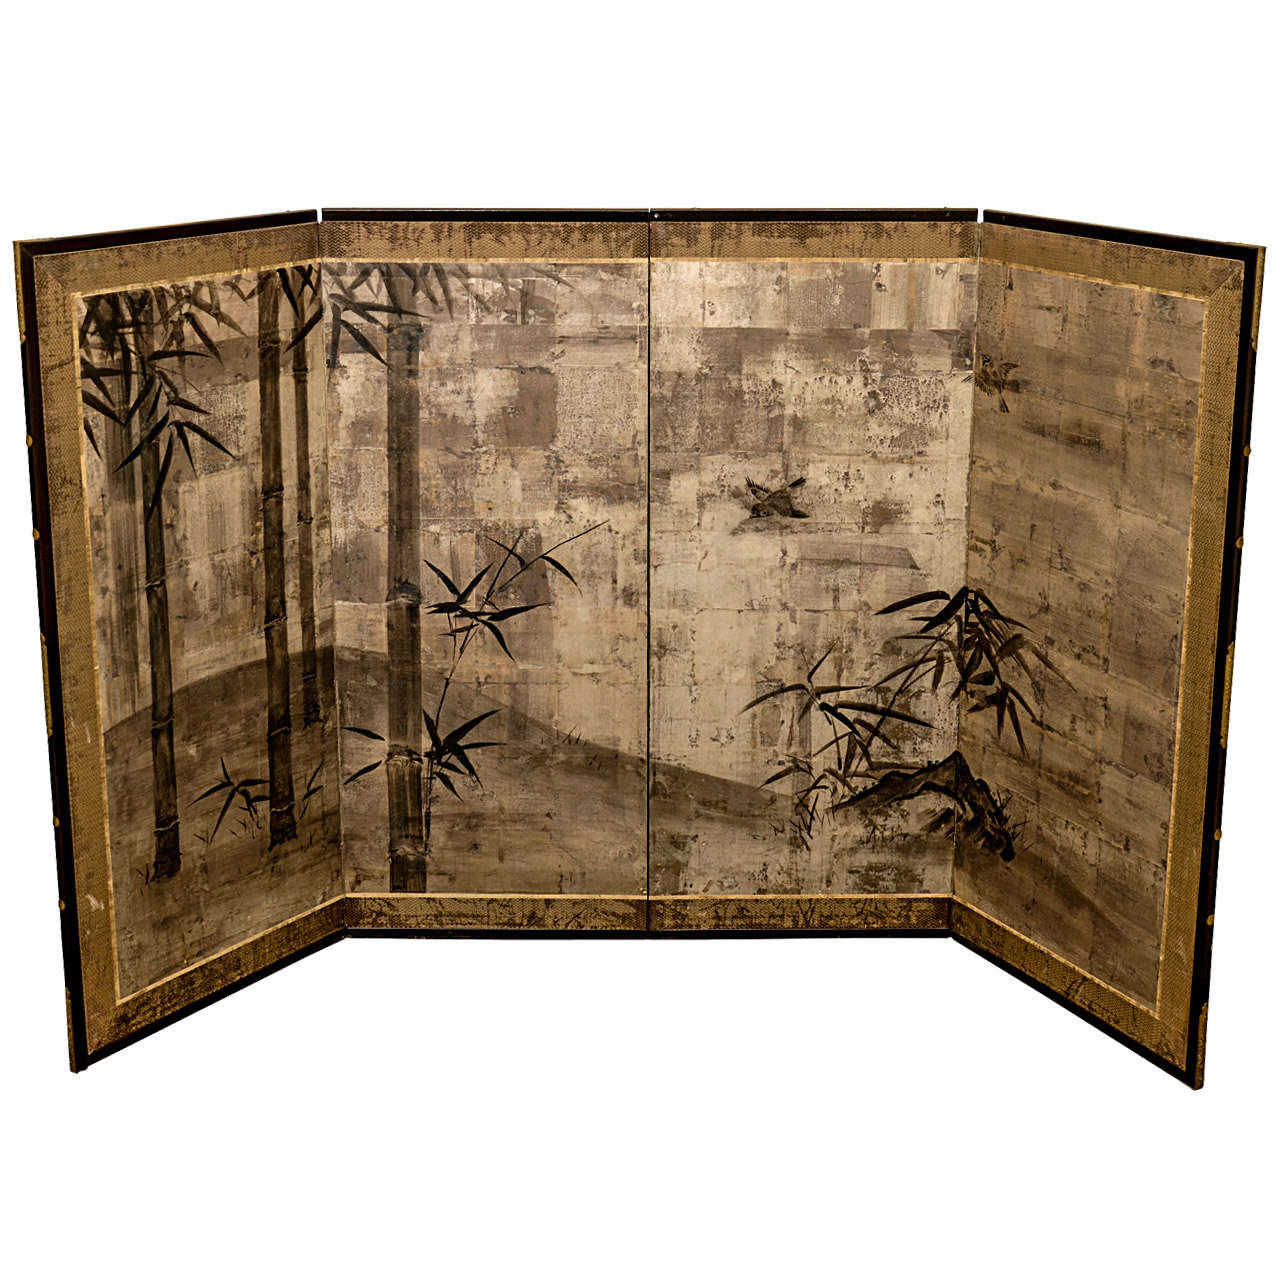 Japanese Momoyama Period 4-Panel Screen with Bamboo and Bird